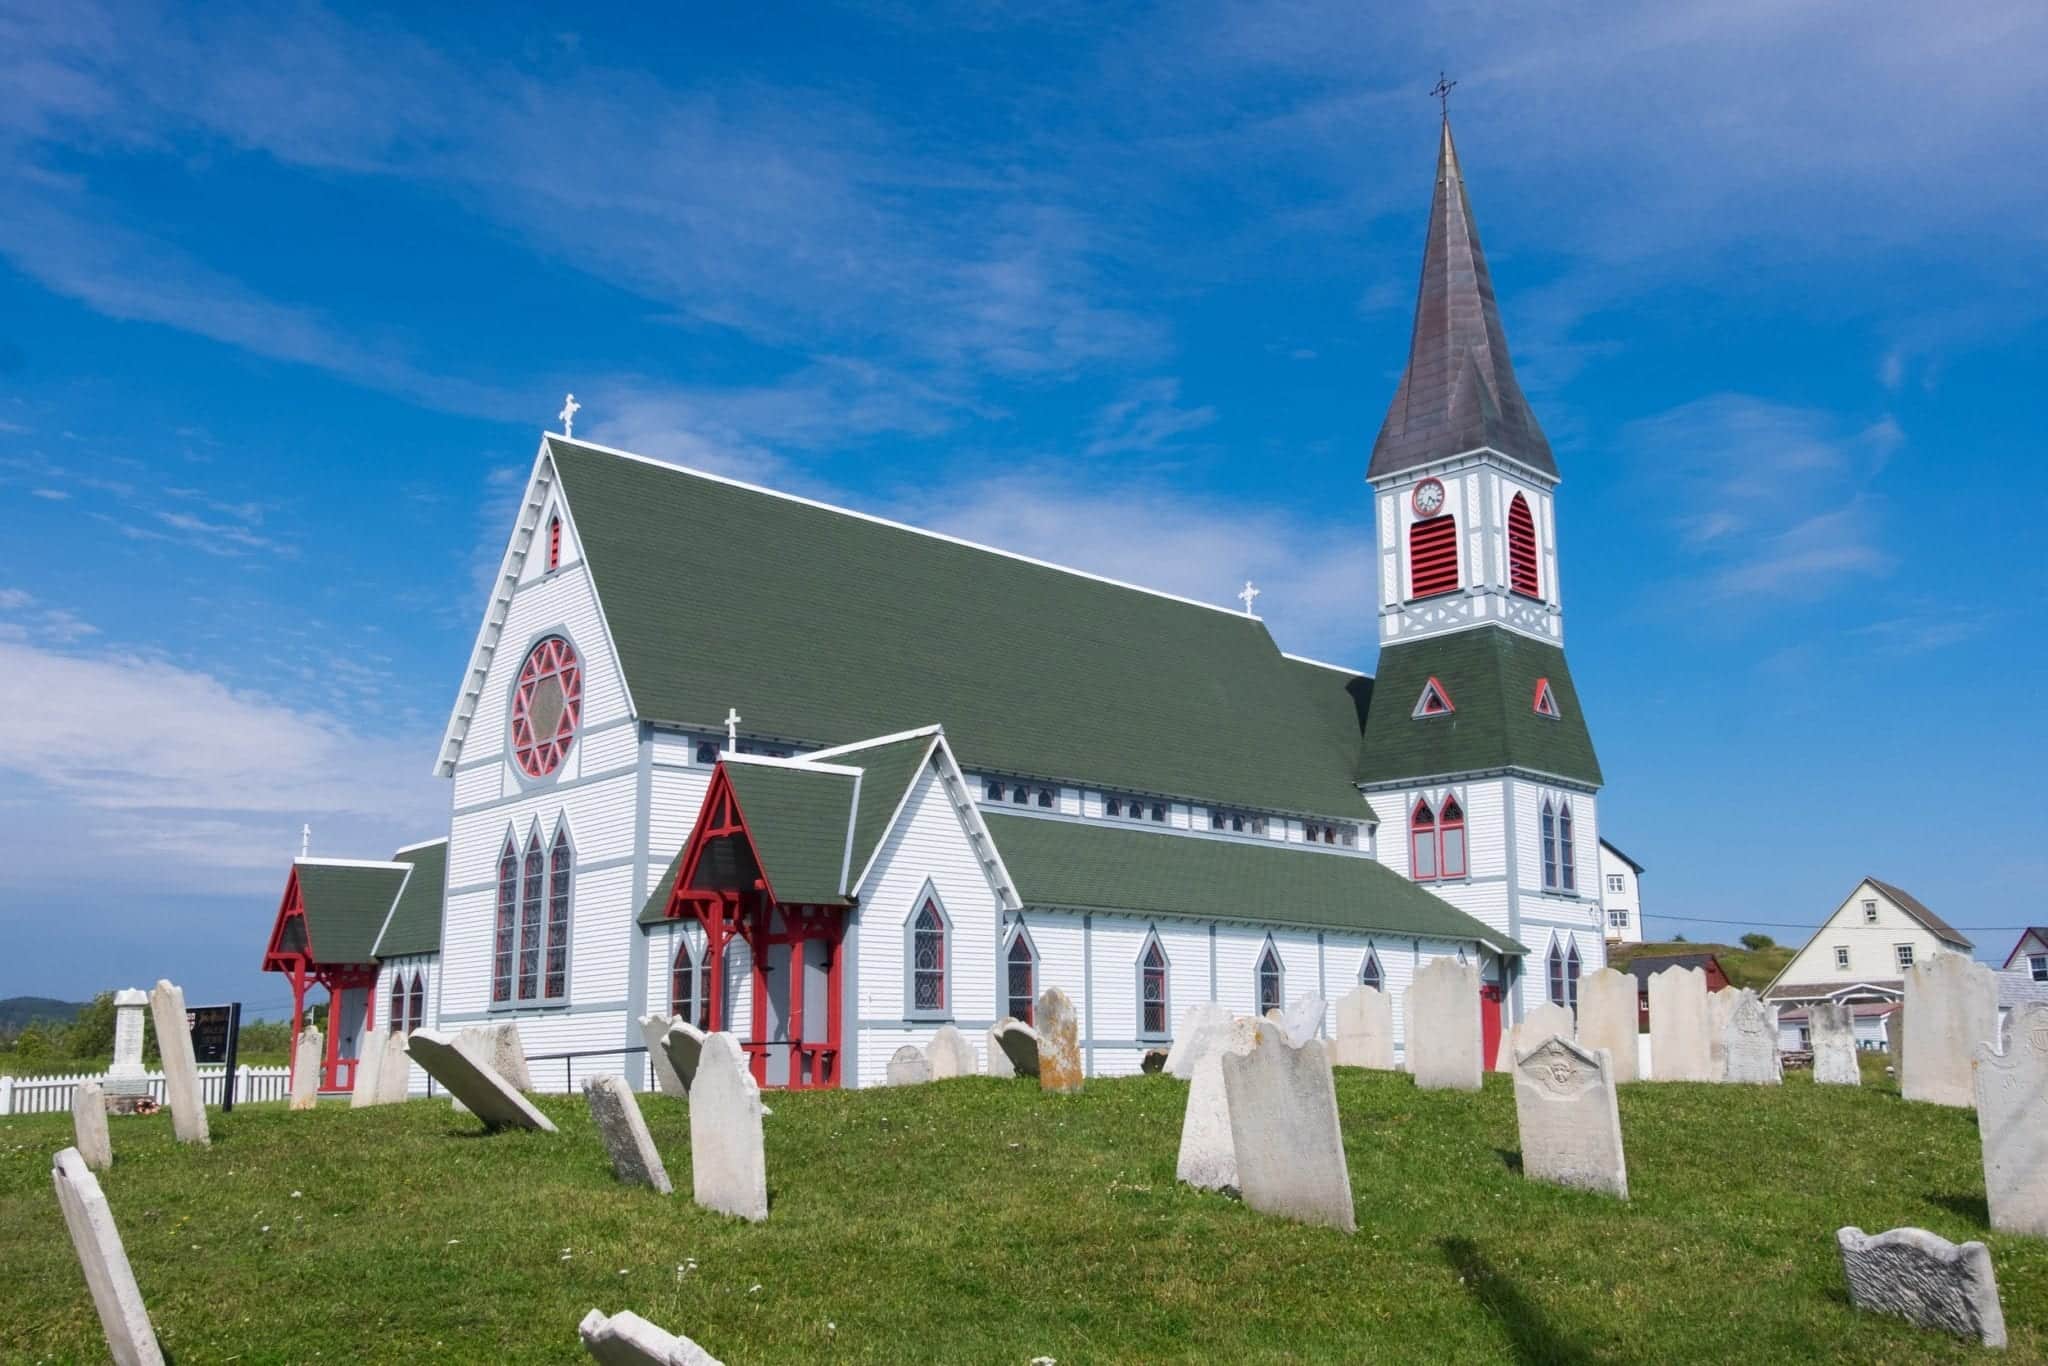 A white church with a green roof and steeple underneath a bright blue sky.